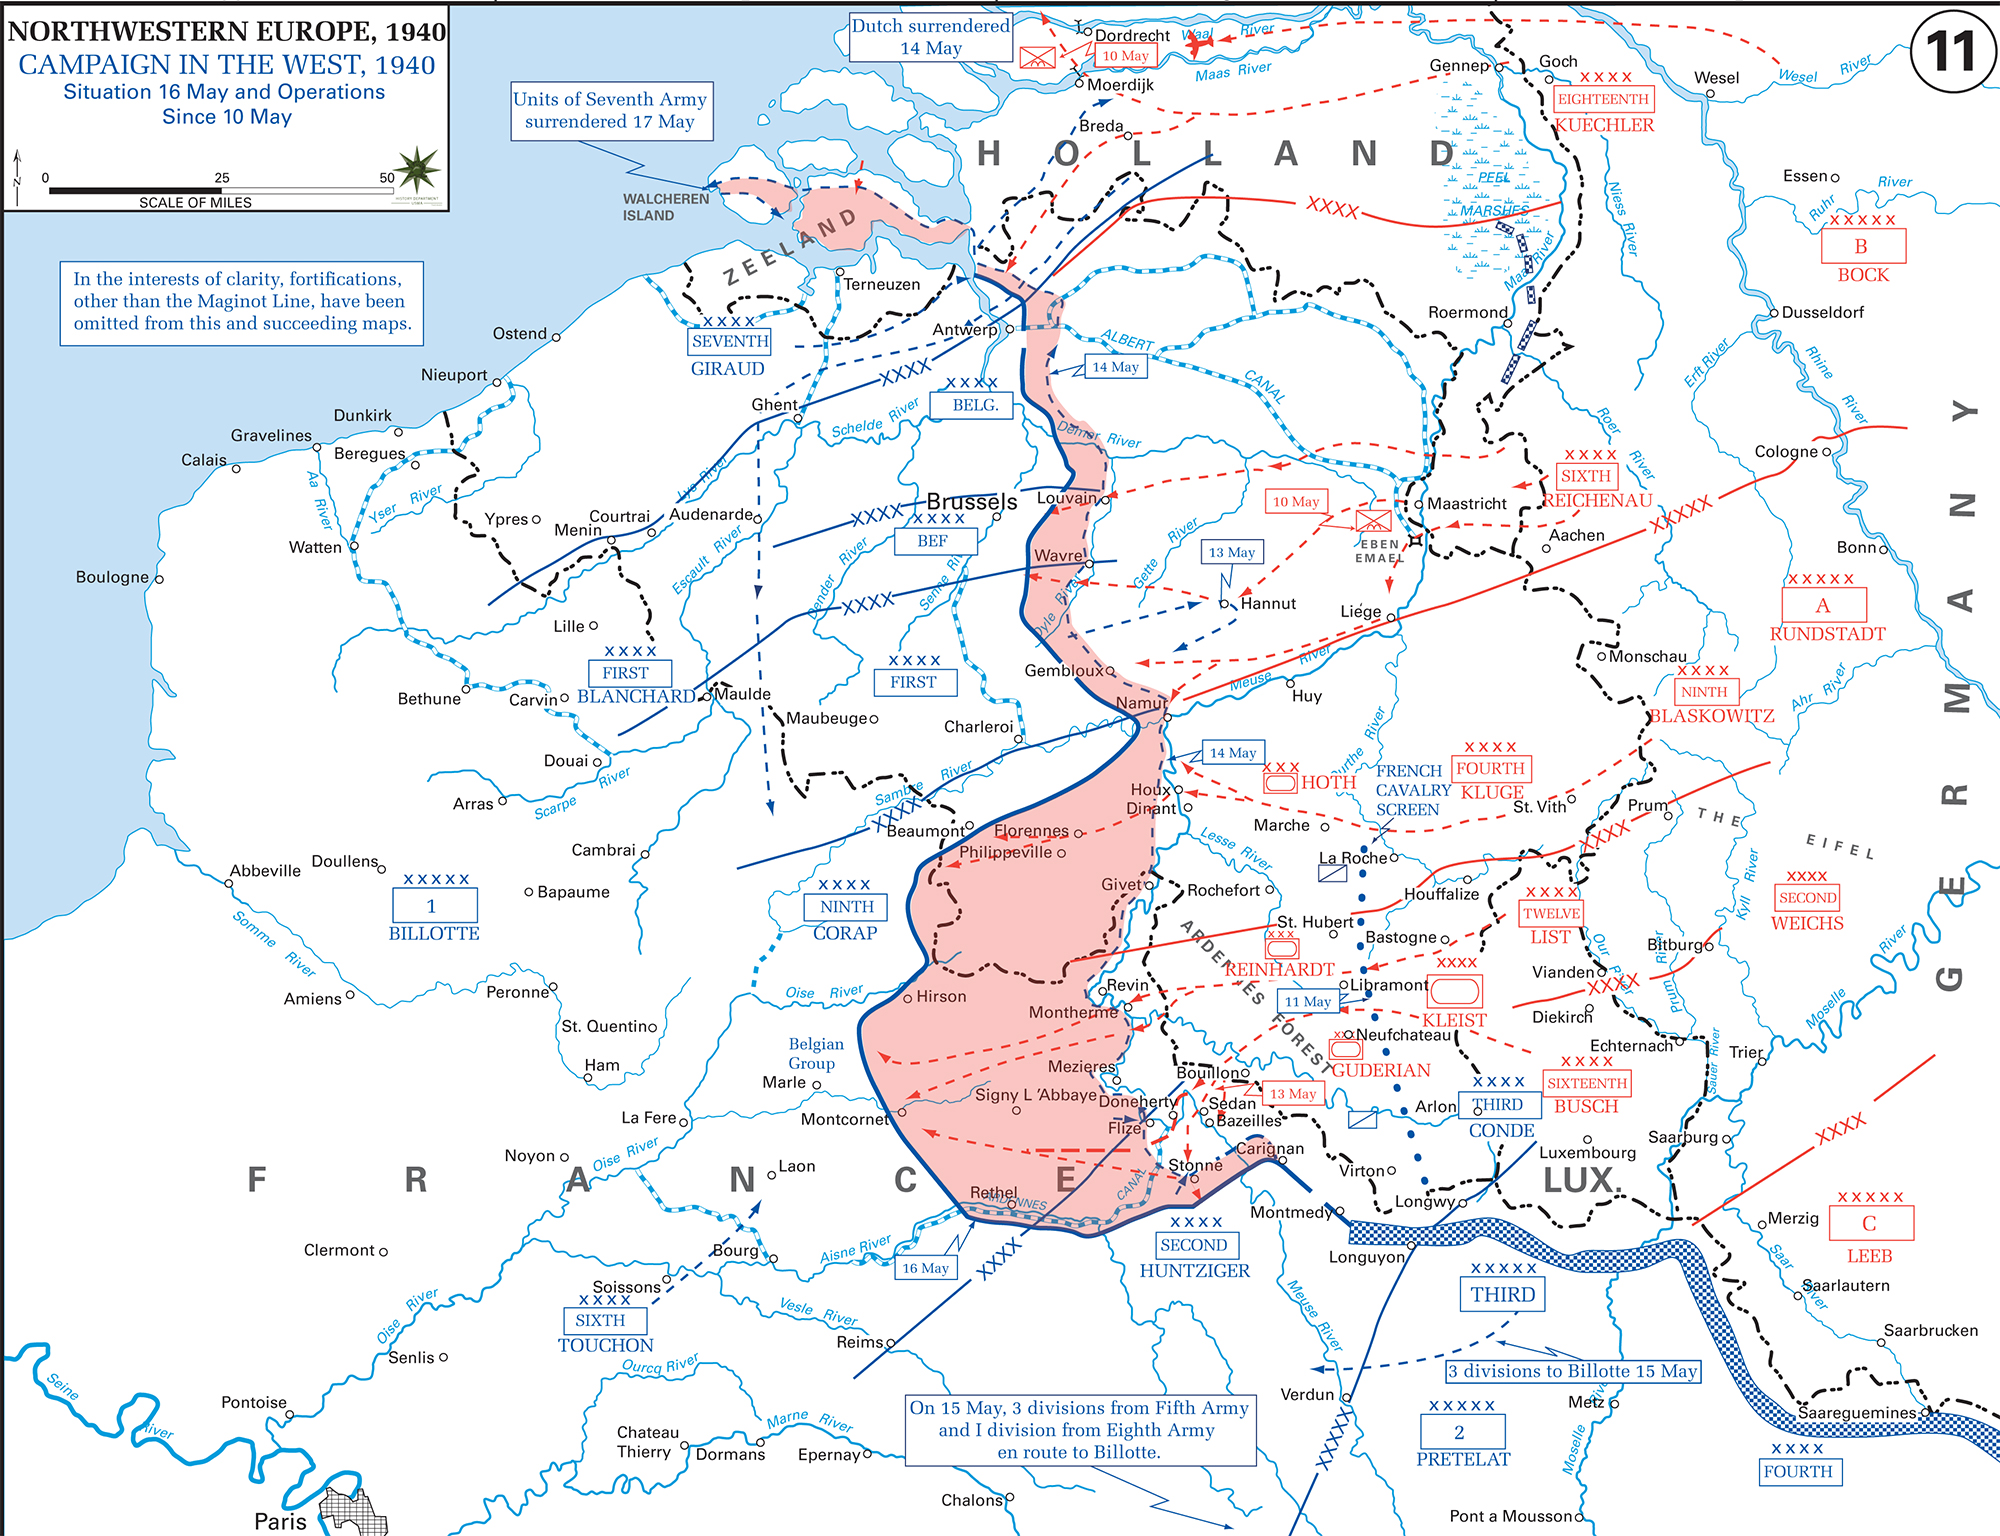 WWII - The War in the West: May 10-16, 1940